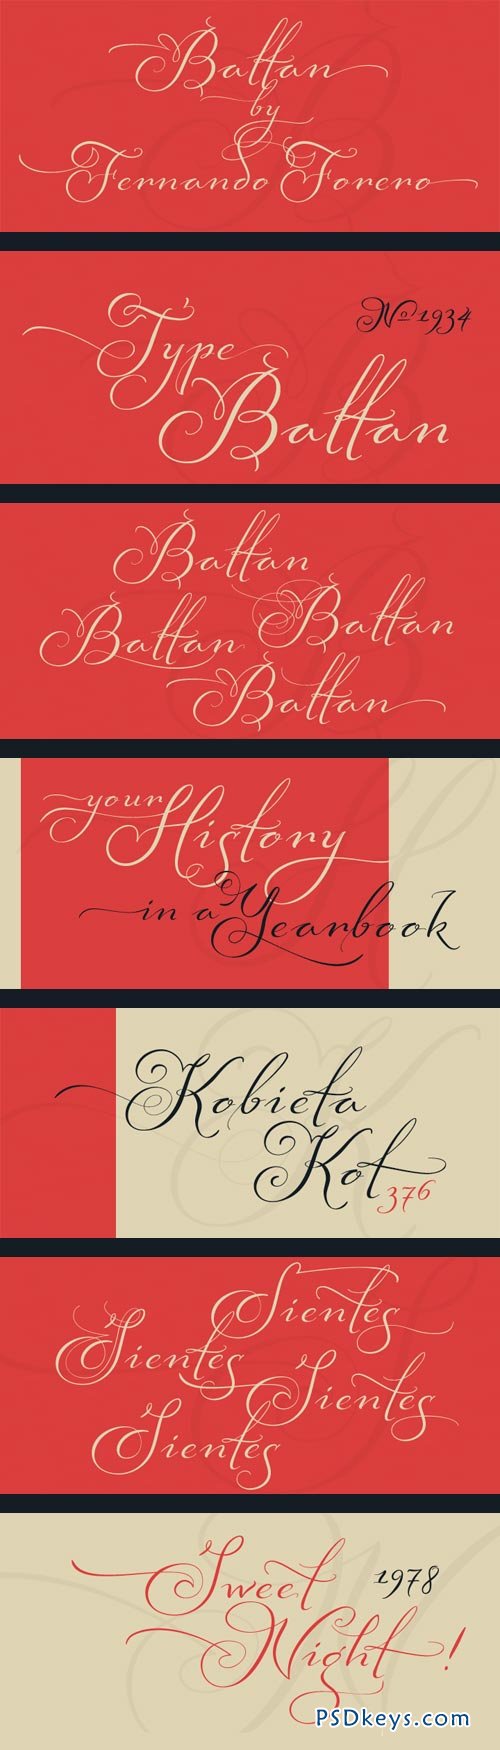 Baltan Font Family - 8 Fonts for $156